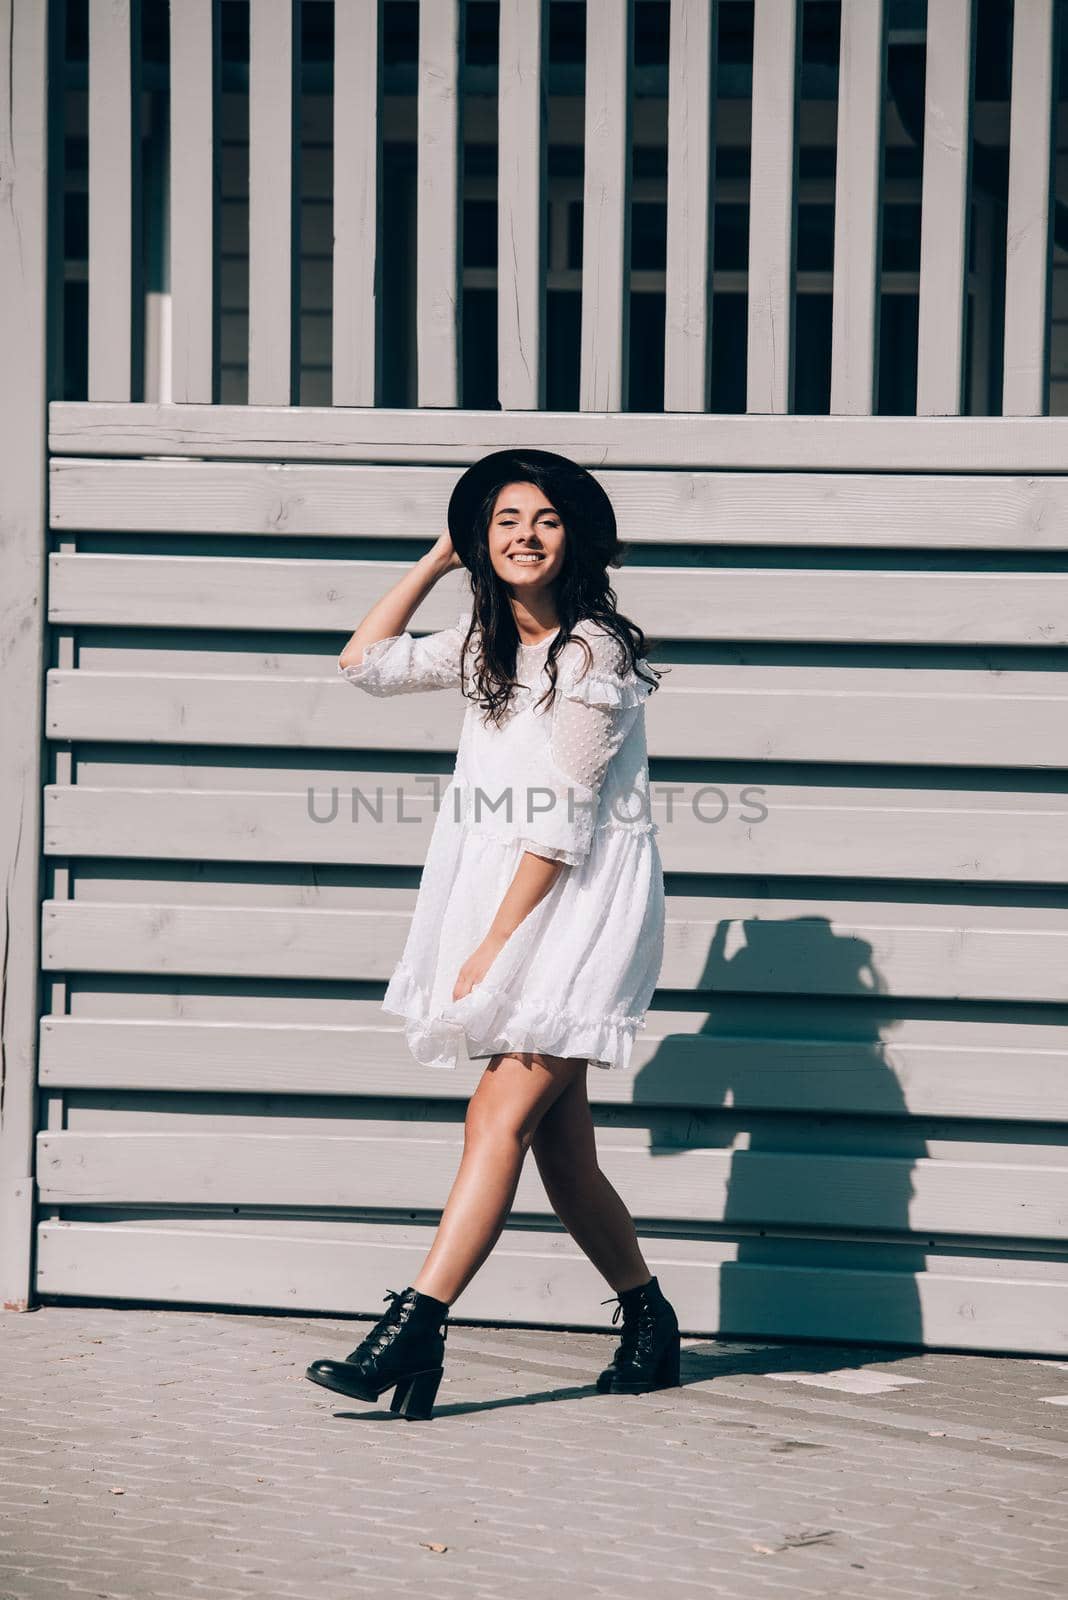 Sunny lifestyle fashion portrait of young stylish hipster woman walking on the street, wearing trendy white dress, black hat and boots. Gray wooden backgrond.